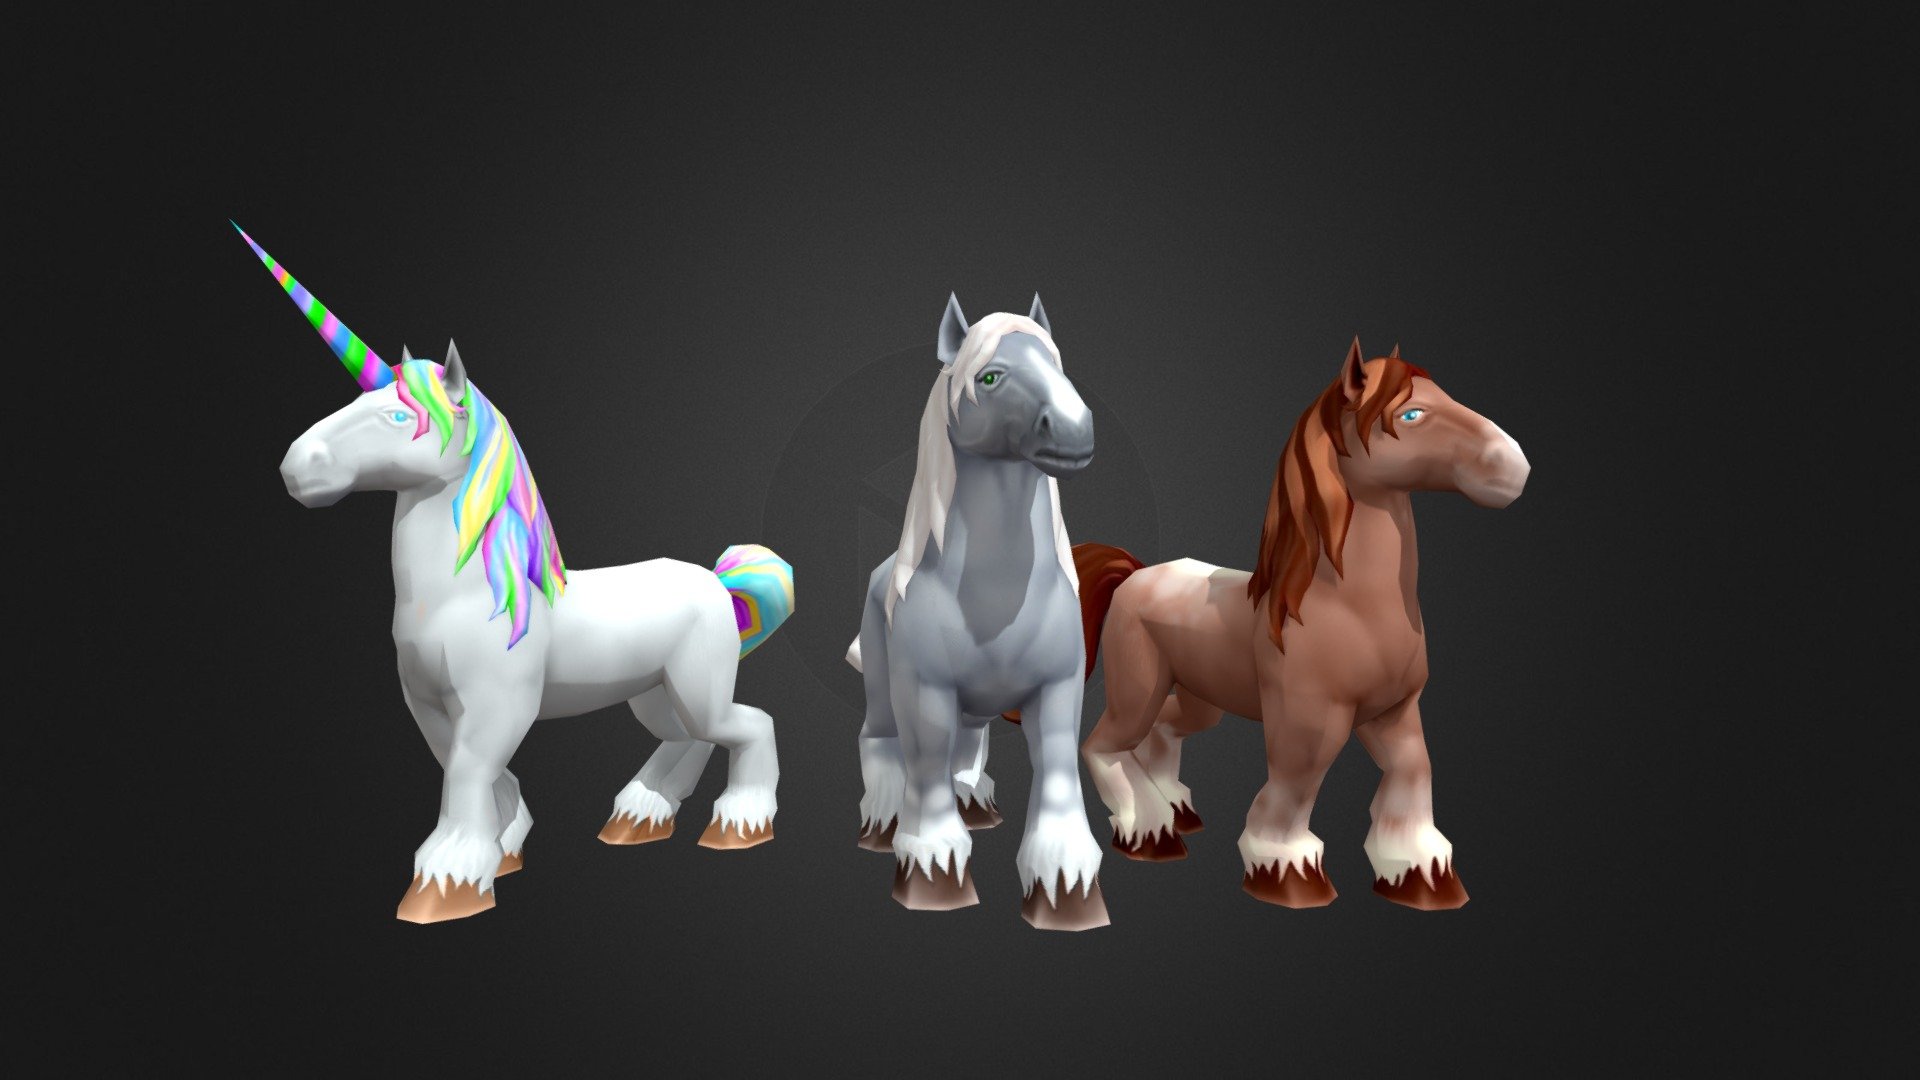 Horses &amp; unicorns animated pack

The pack contains a collection of well organized files


Animations
Horse (3 textures)

Unicorn (3 textures)




Attack_1

Attack_2

Damage

Death

Idle

Jump

Run

Stand


Please feel free to contact me if you have any questions or comments. If you like it, please rate it! - Horses & unicorns animated pack - Buy Royalty Free 3D model by TheGameAssets 3d model